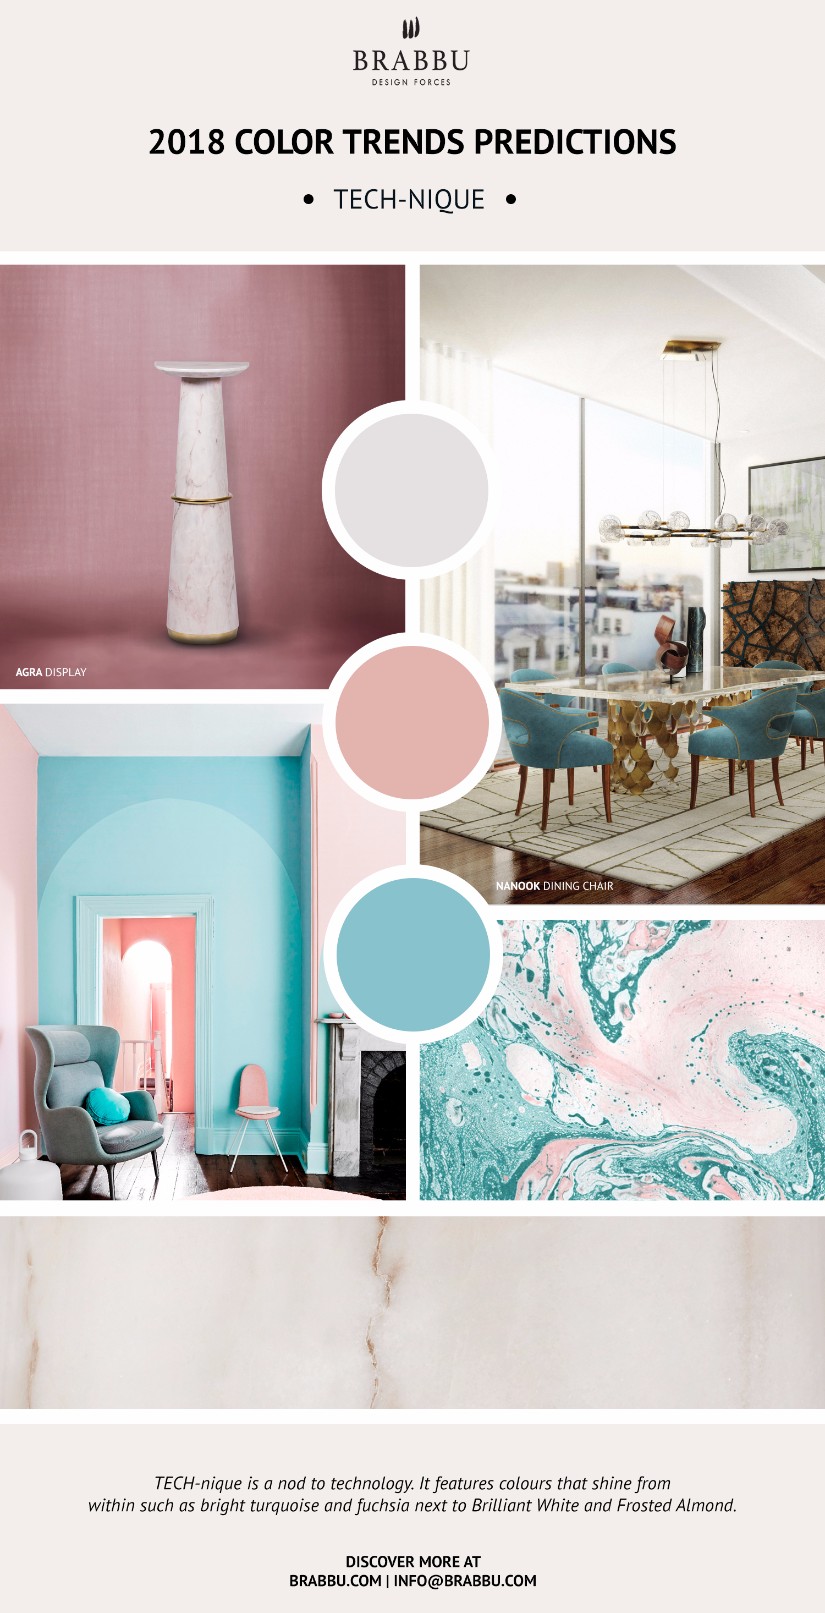 Trend Alert! Here Are The 2018 Color Trends Predictions - TECH-nique color trends Trend Alert! Here Are The 2018 Color Trends Predictions Trend Alert Here Are The 2018 Color Trends Predictions TECH nique